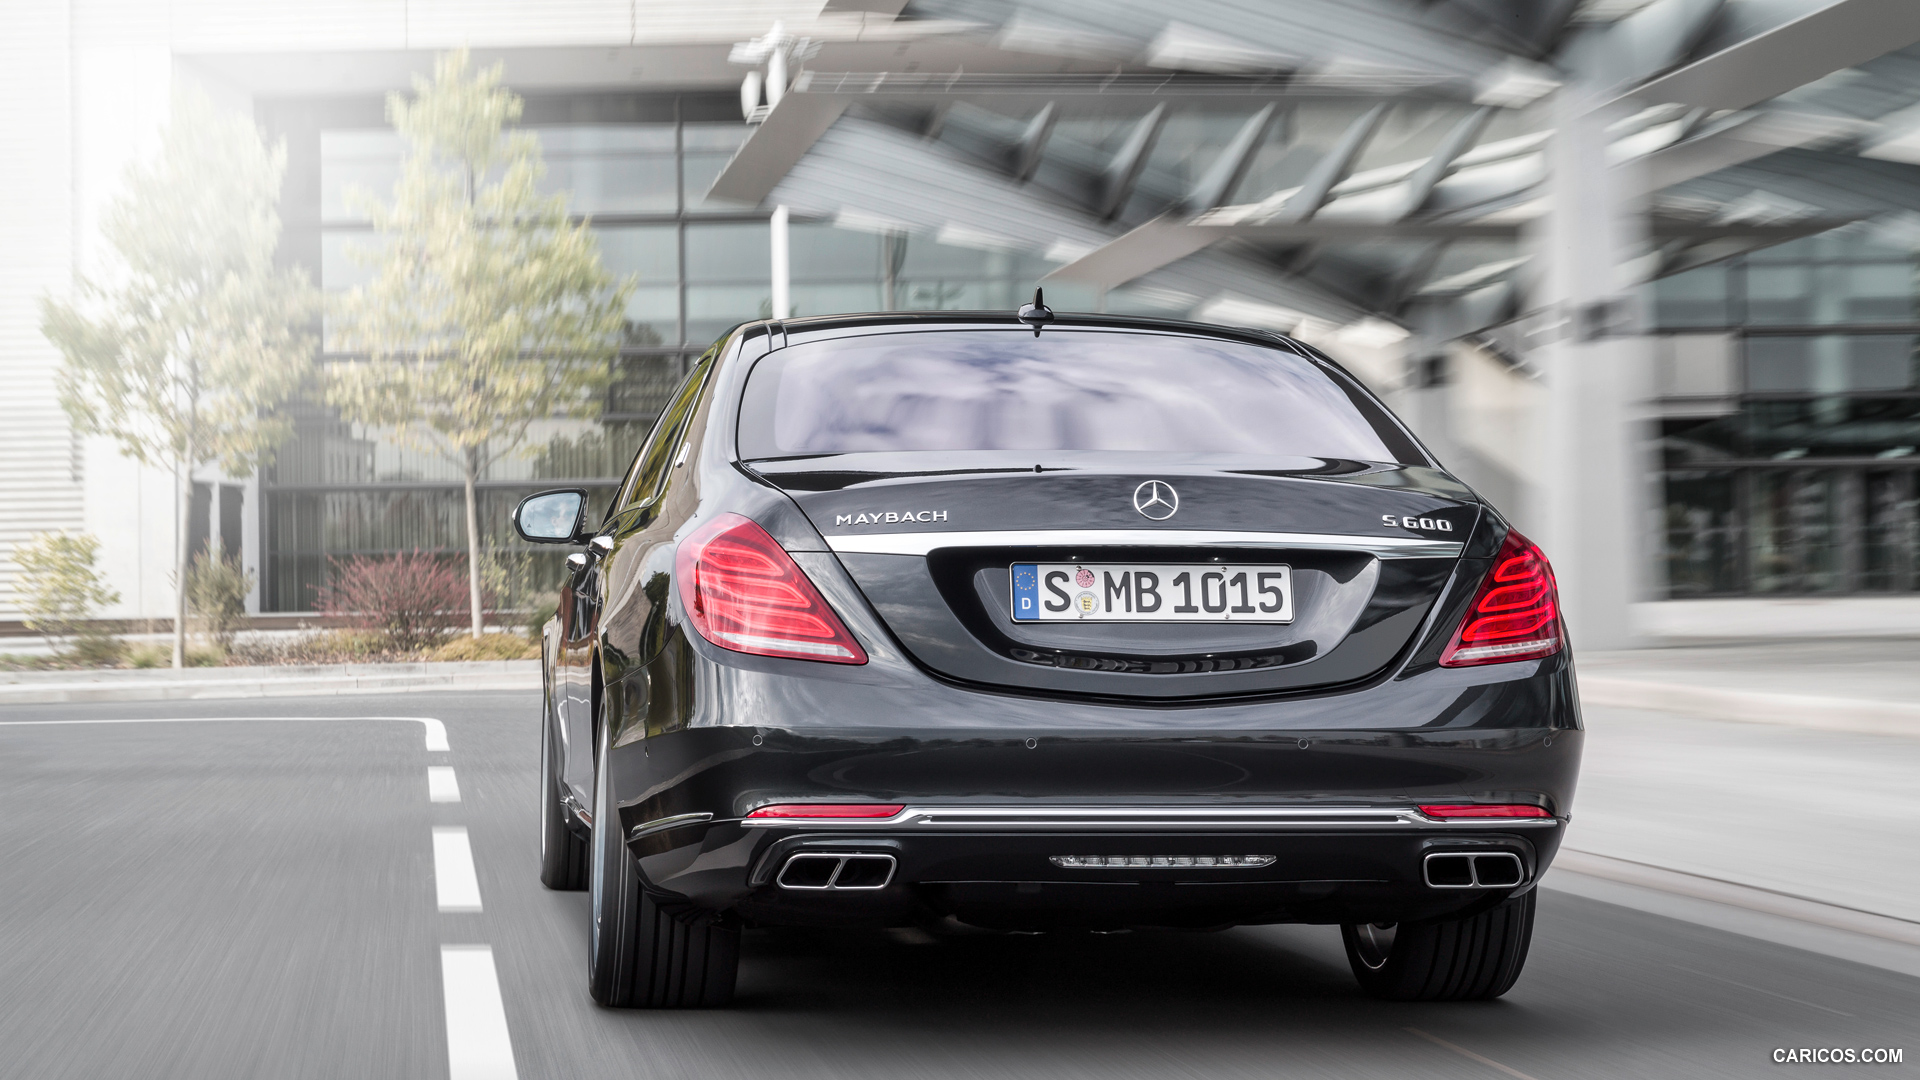 2016 Mercedes-Maybach S-Class S600 - Rear, #19 of 225